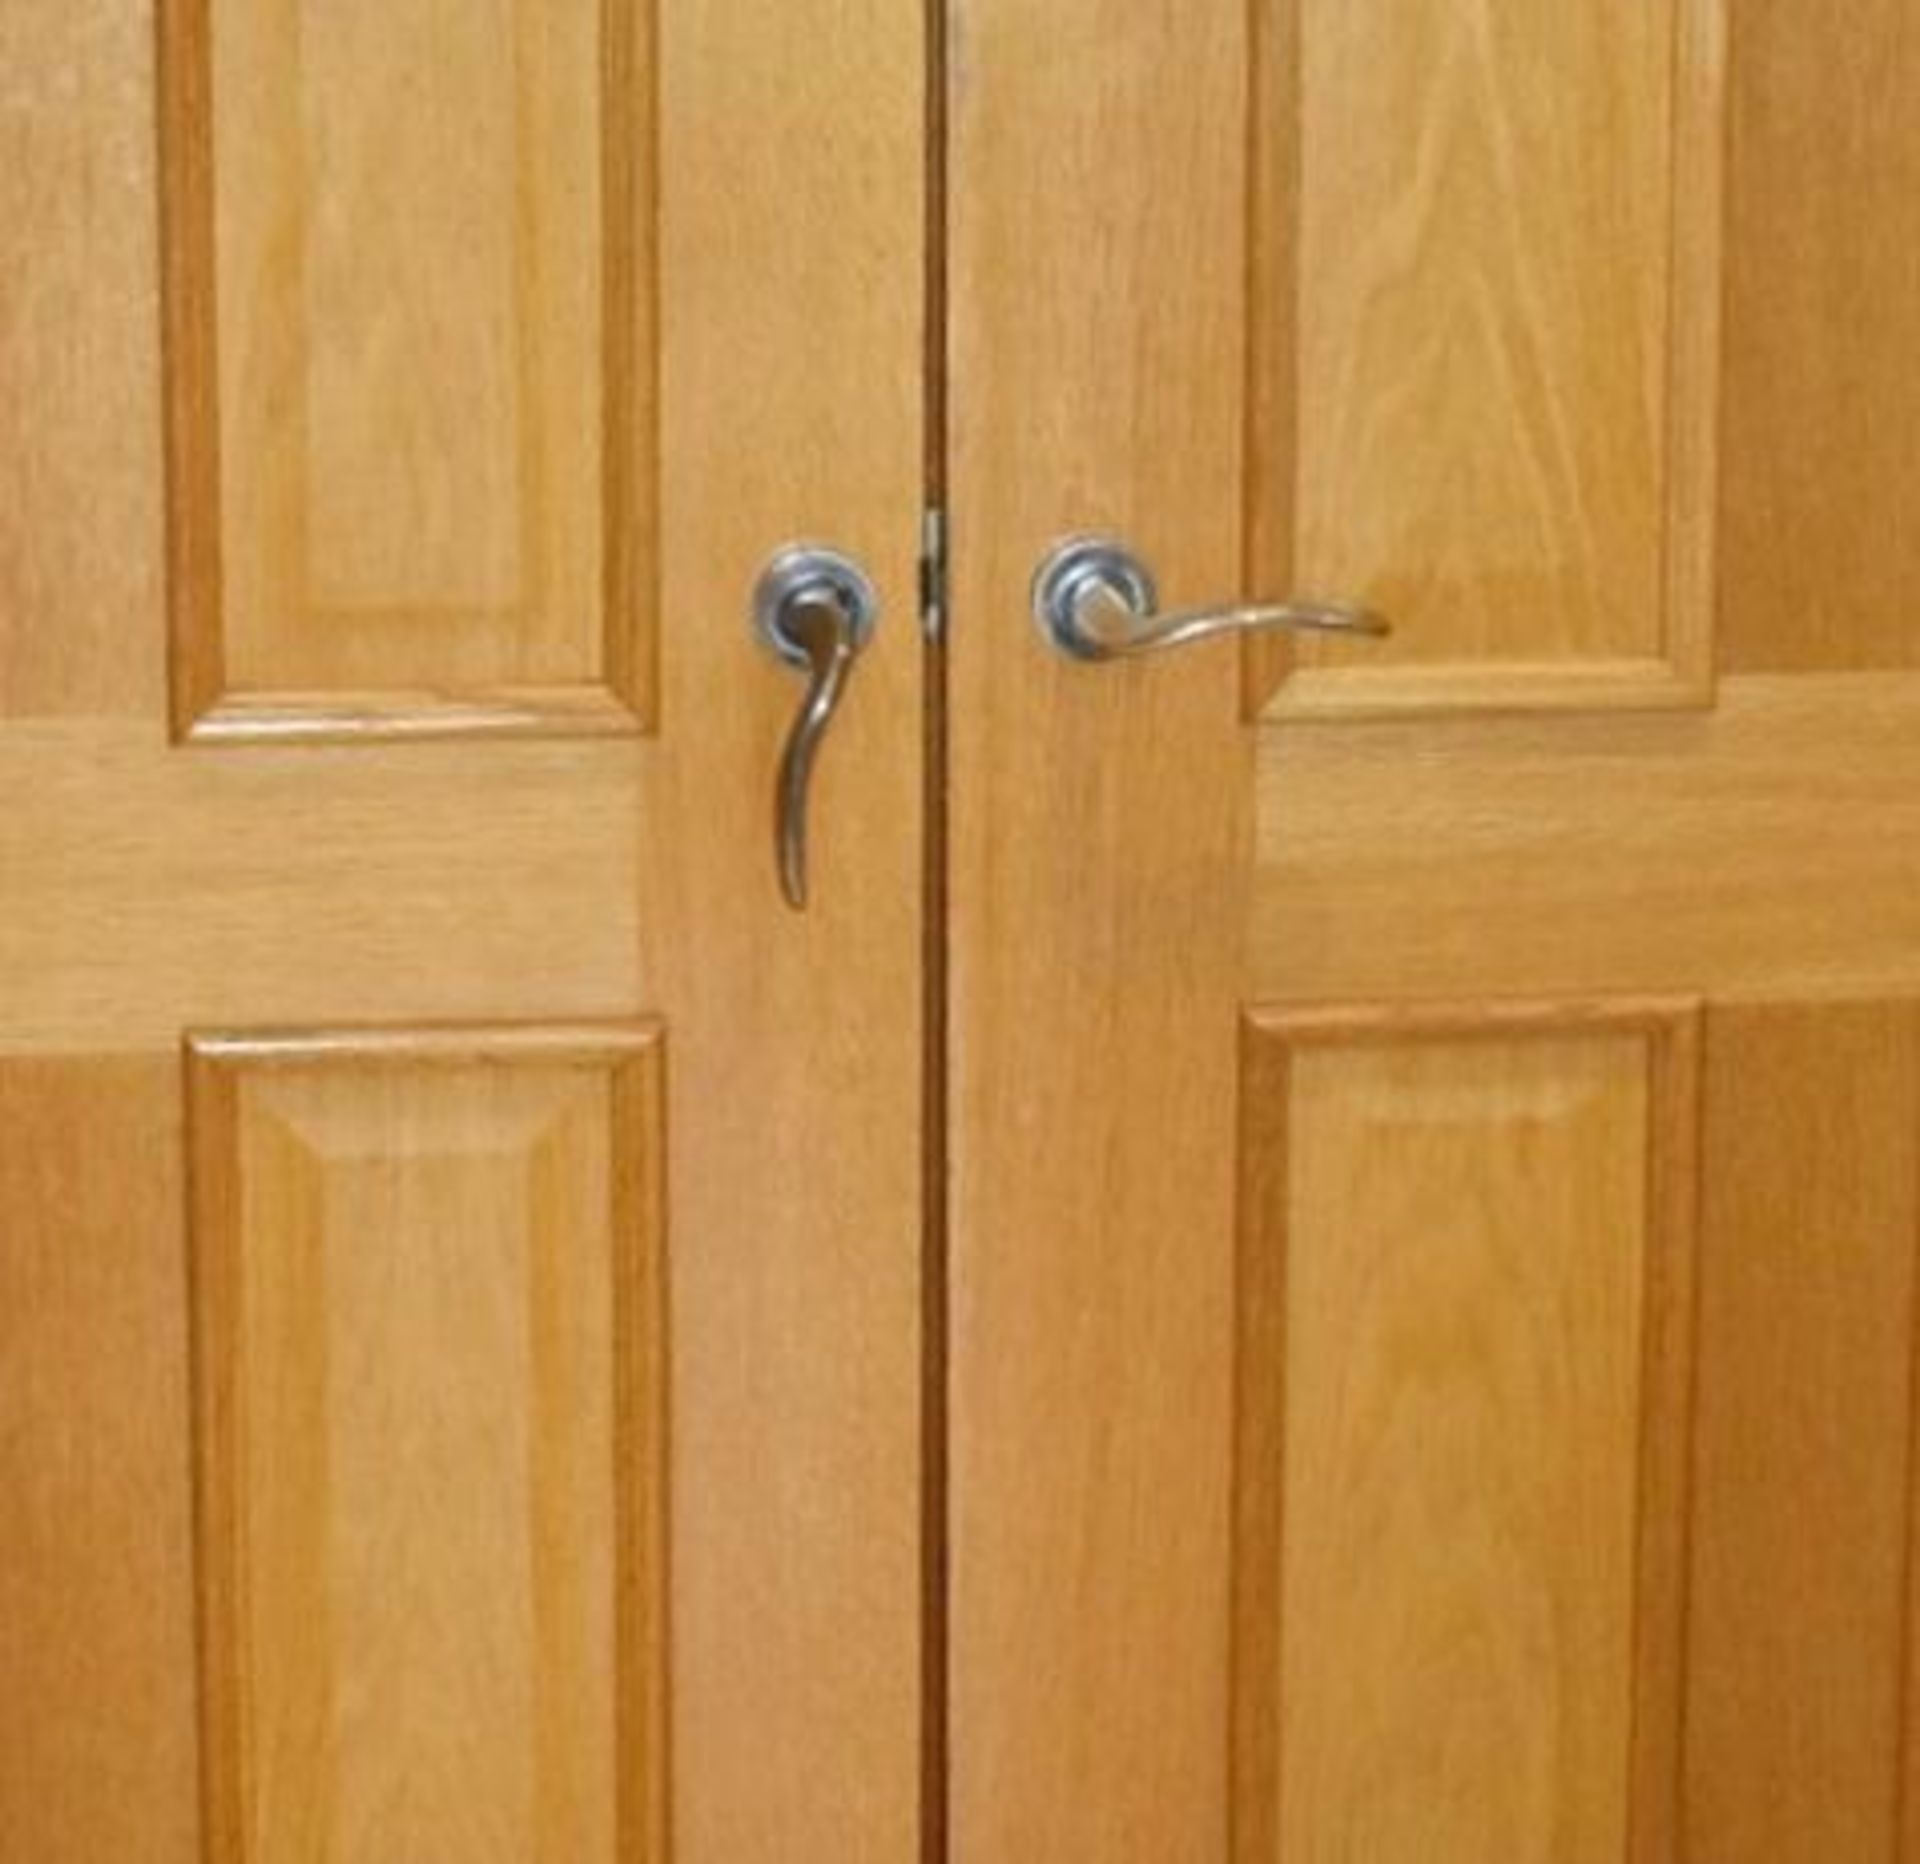 A Pair Of High Quality Internal Wooden Doors - Dimensions Of Each (approx): H200 x W75 x 7cm - Ref: - Image 3 of 3